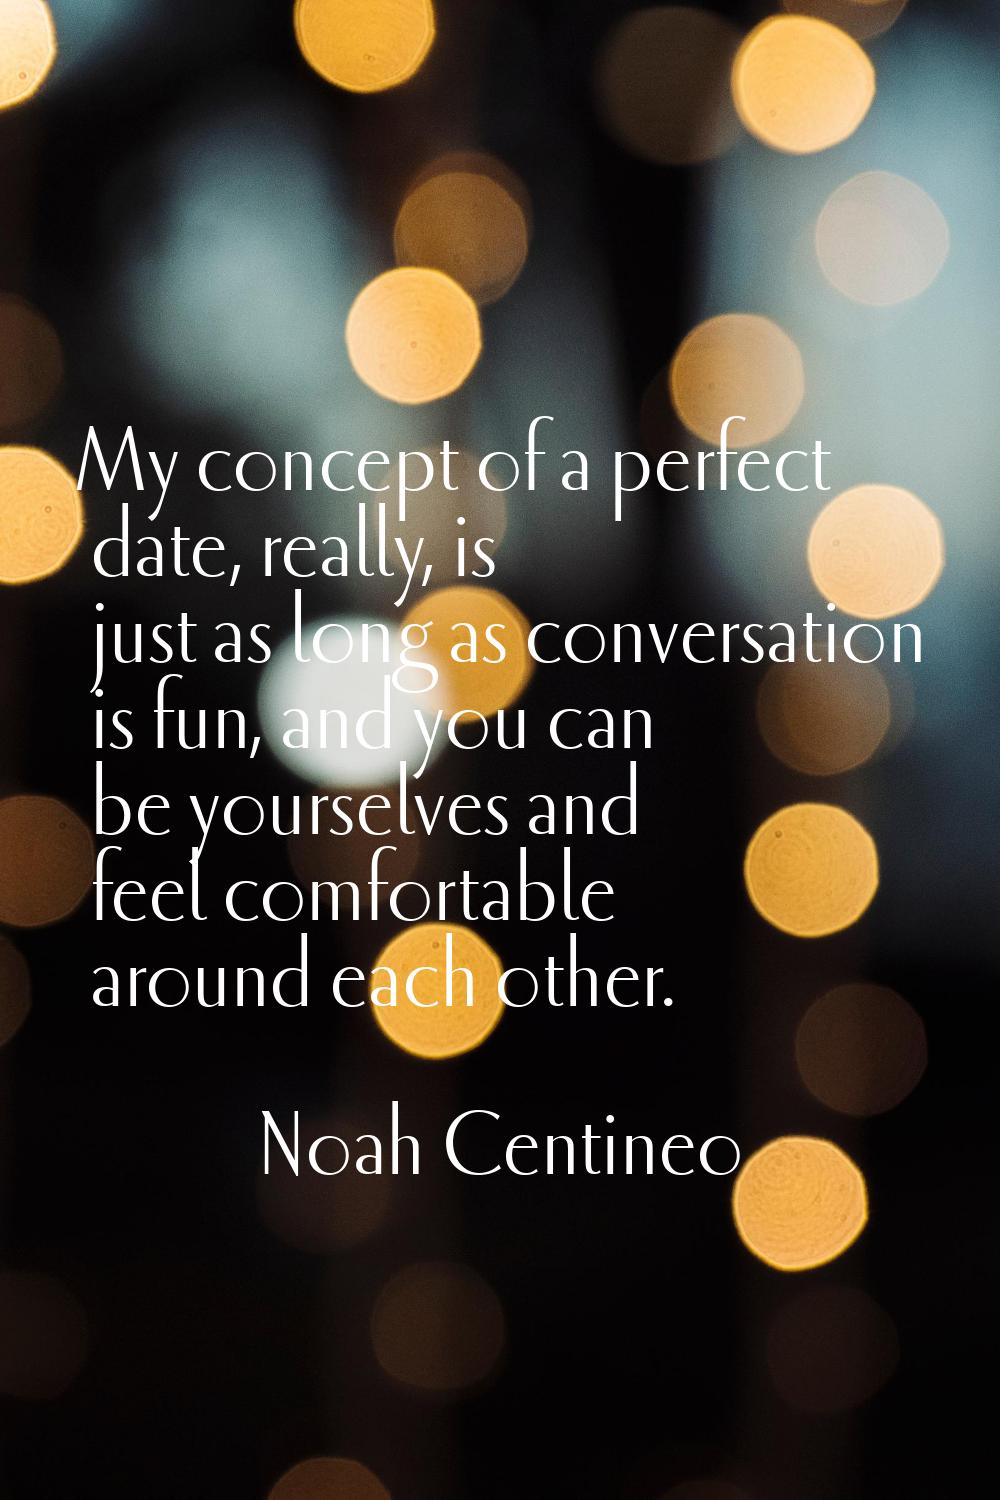 My concept of a perfect date, really, is just as long as conversation is fun, and you can be yourse